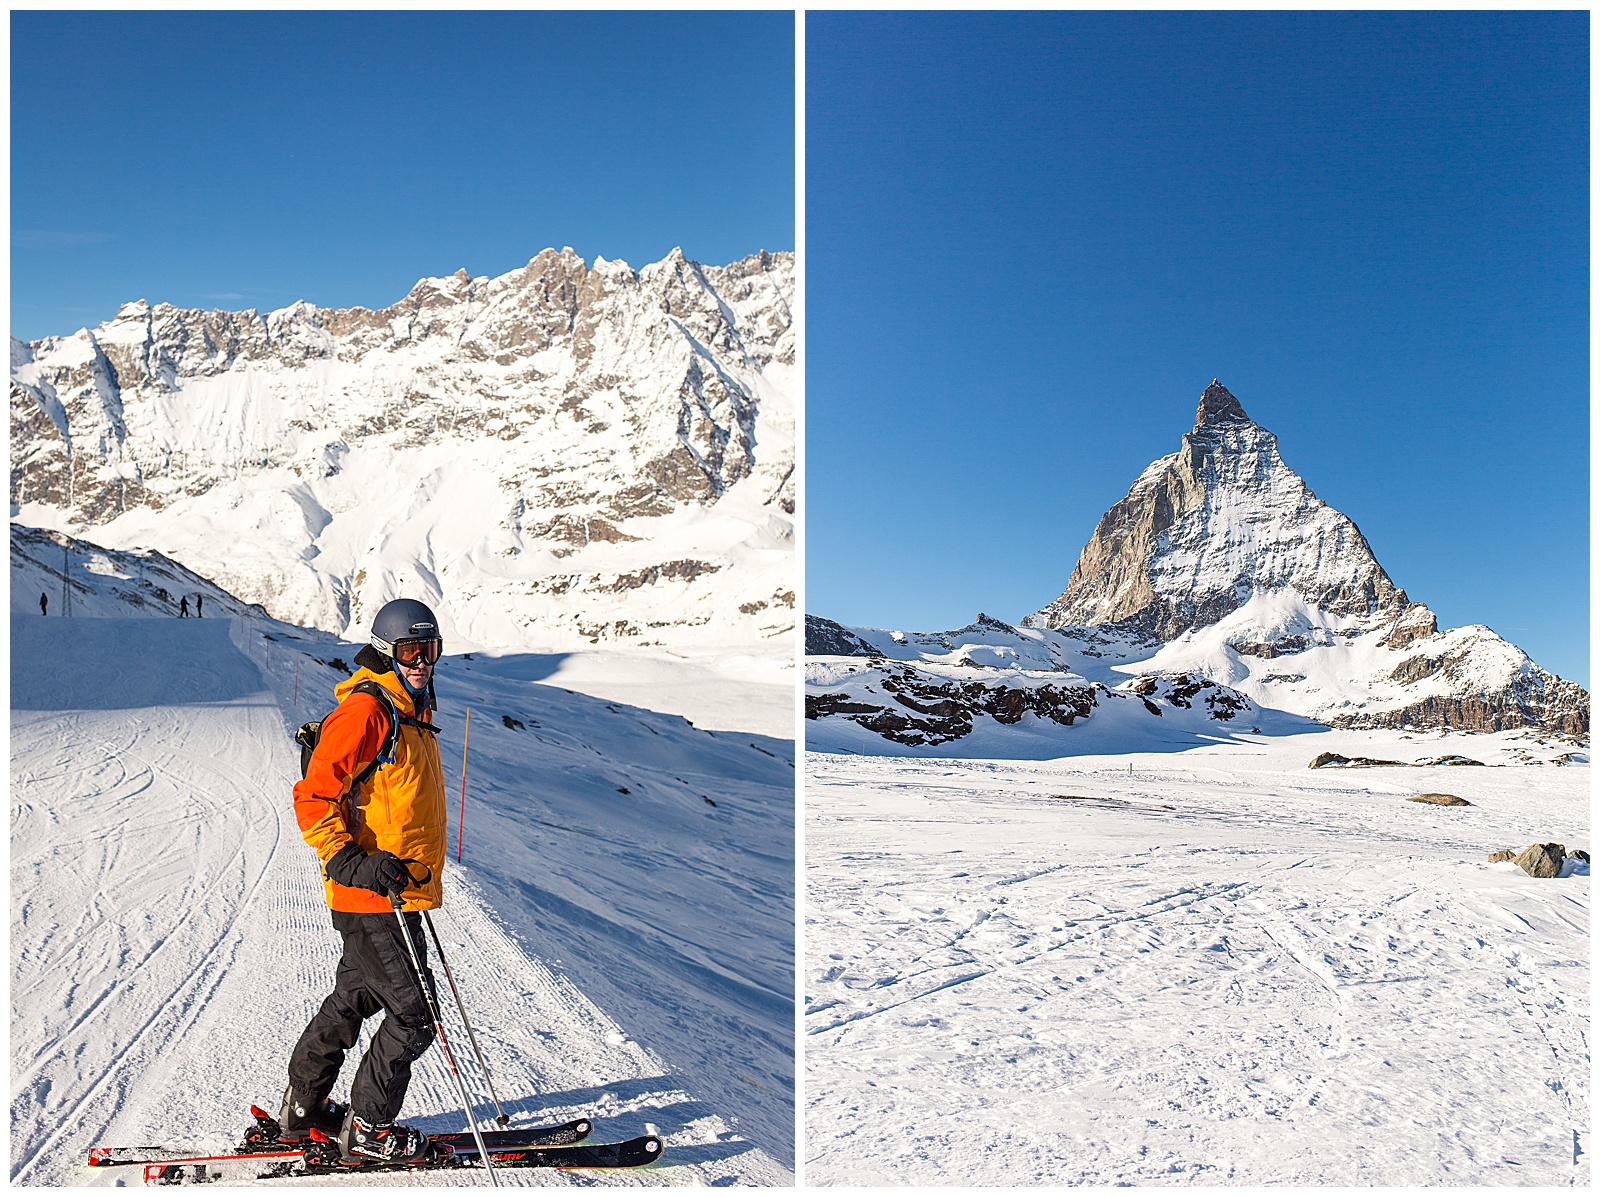 Views of the Matterhorn in our Switzerland Winter Vacation